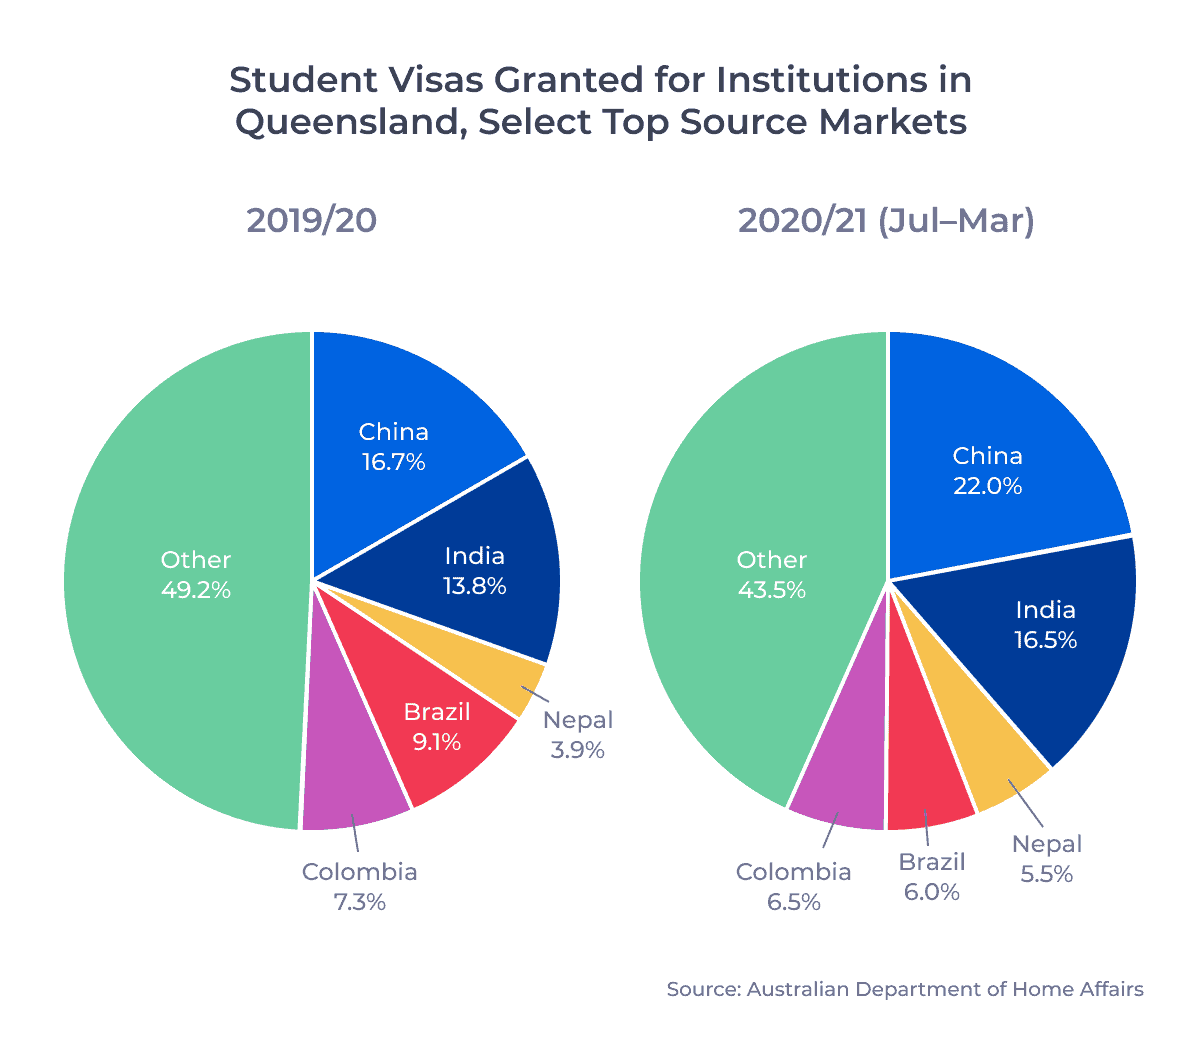 Student Visas Granted for Institutions in Queensland, Select Top Source Markets